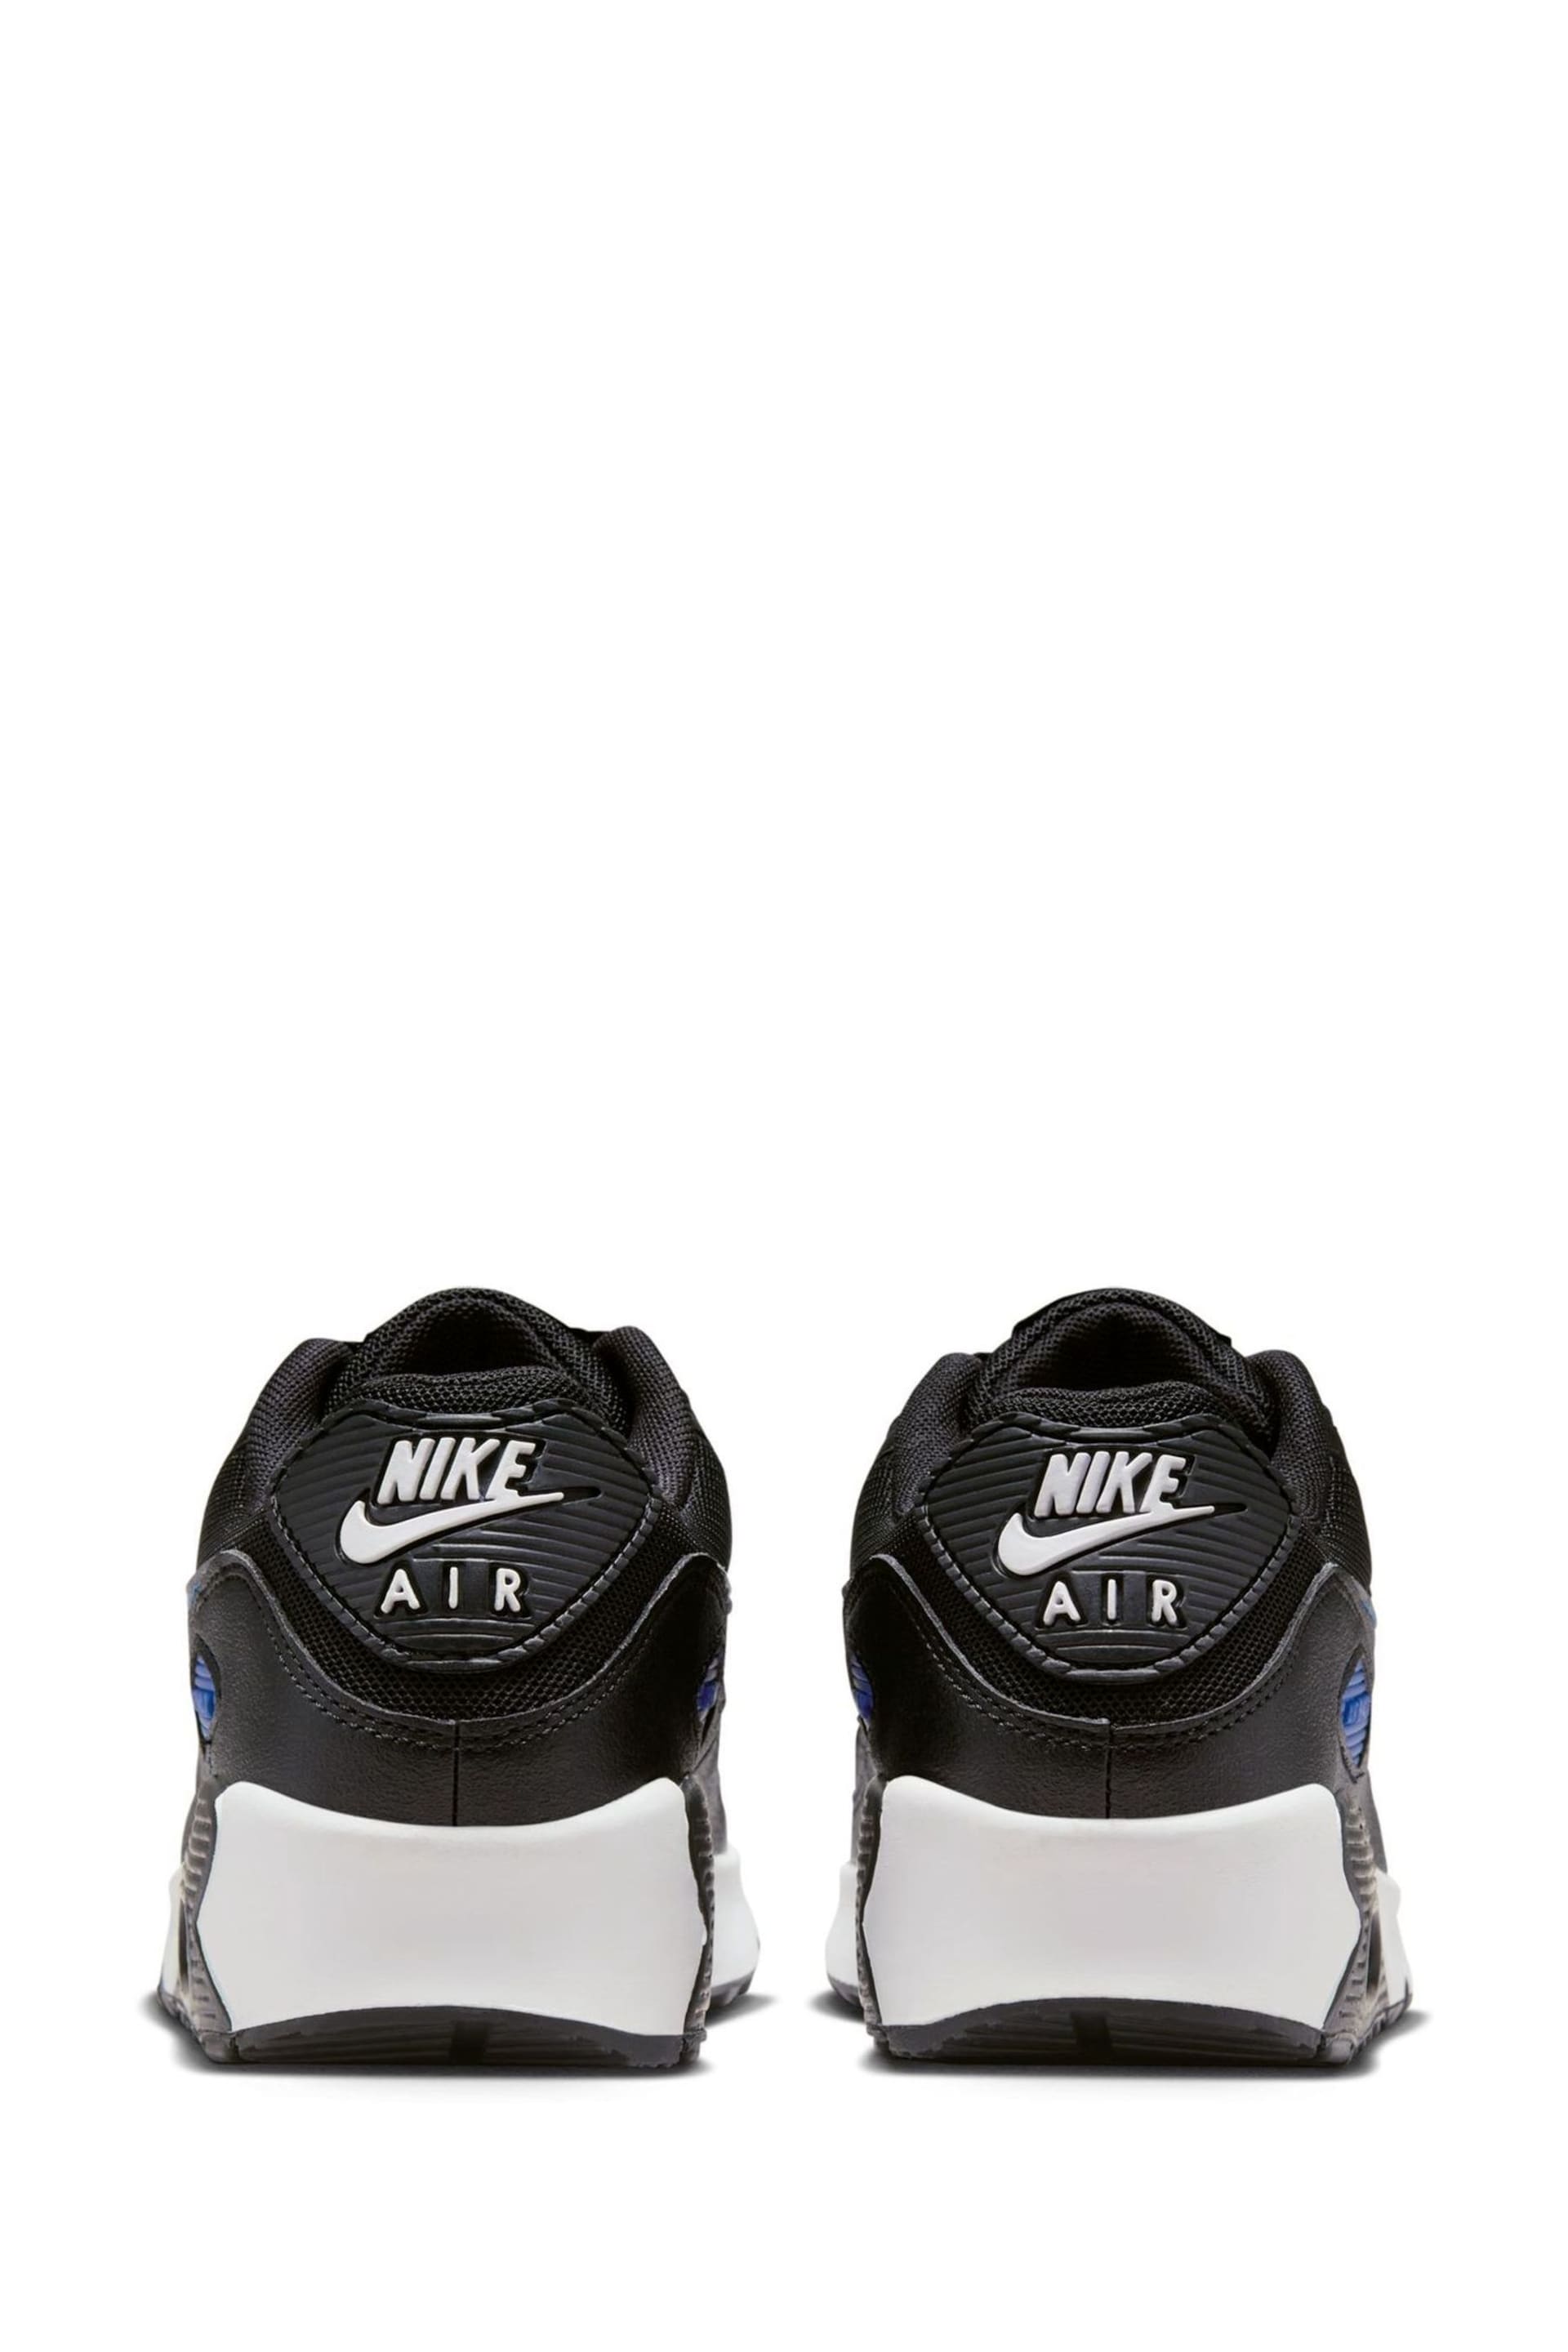 Nike Black/Blue Air Max 90 Youth Trainers - Image 4 of 8